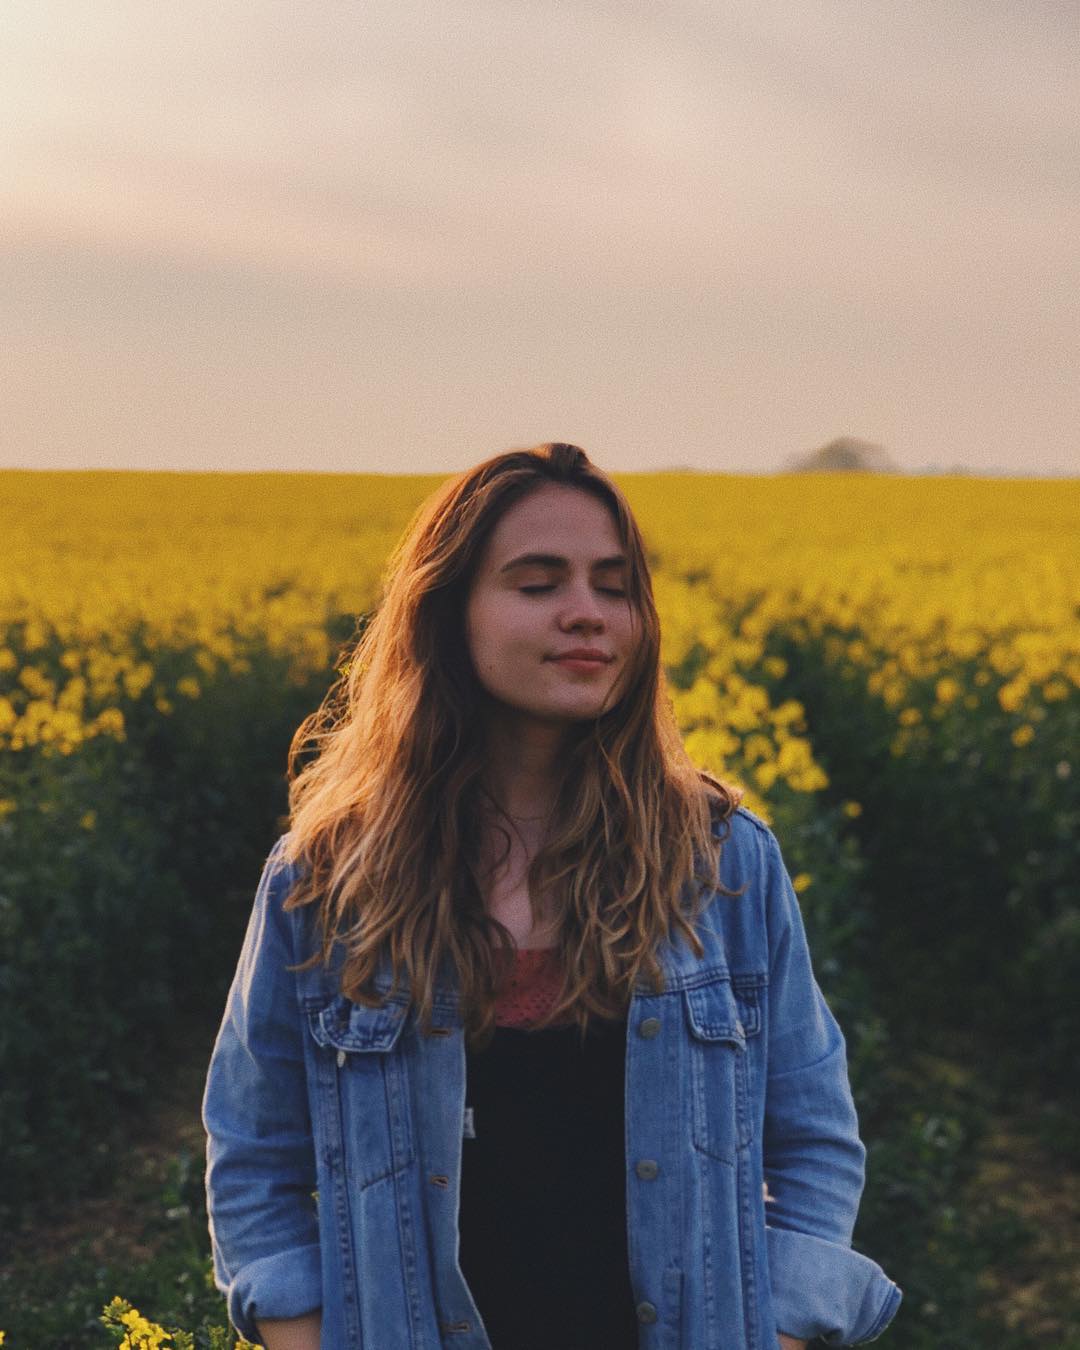 A girl stood in a field of flowers